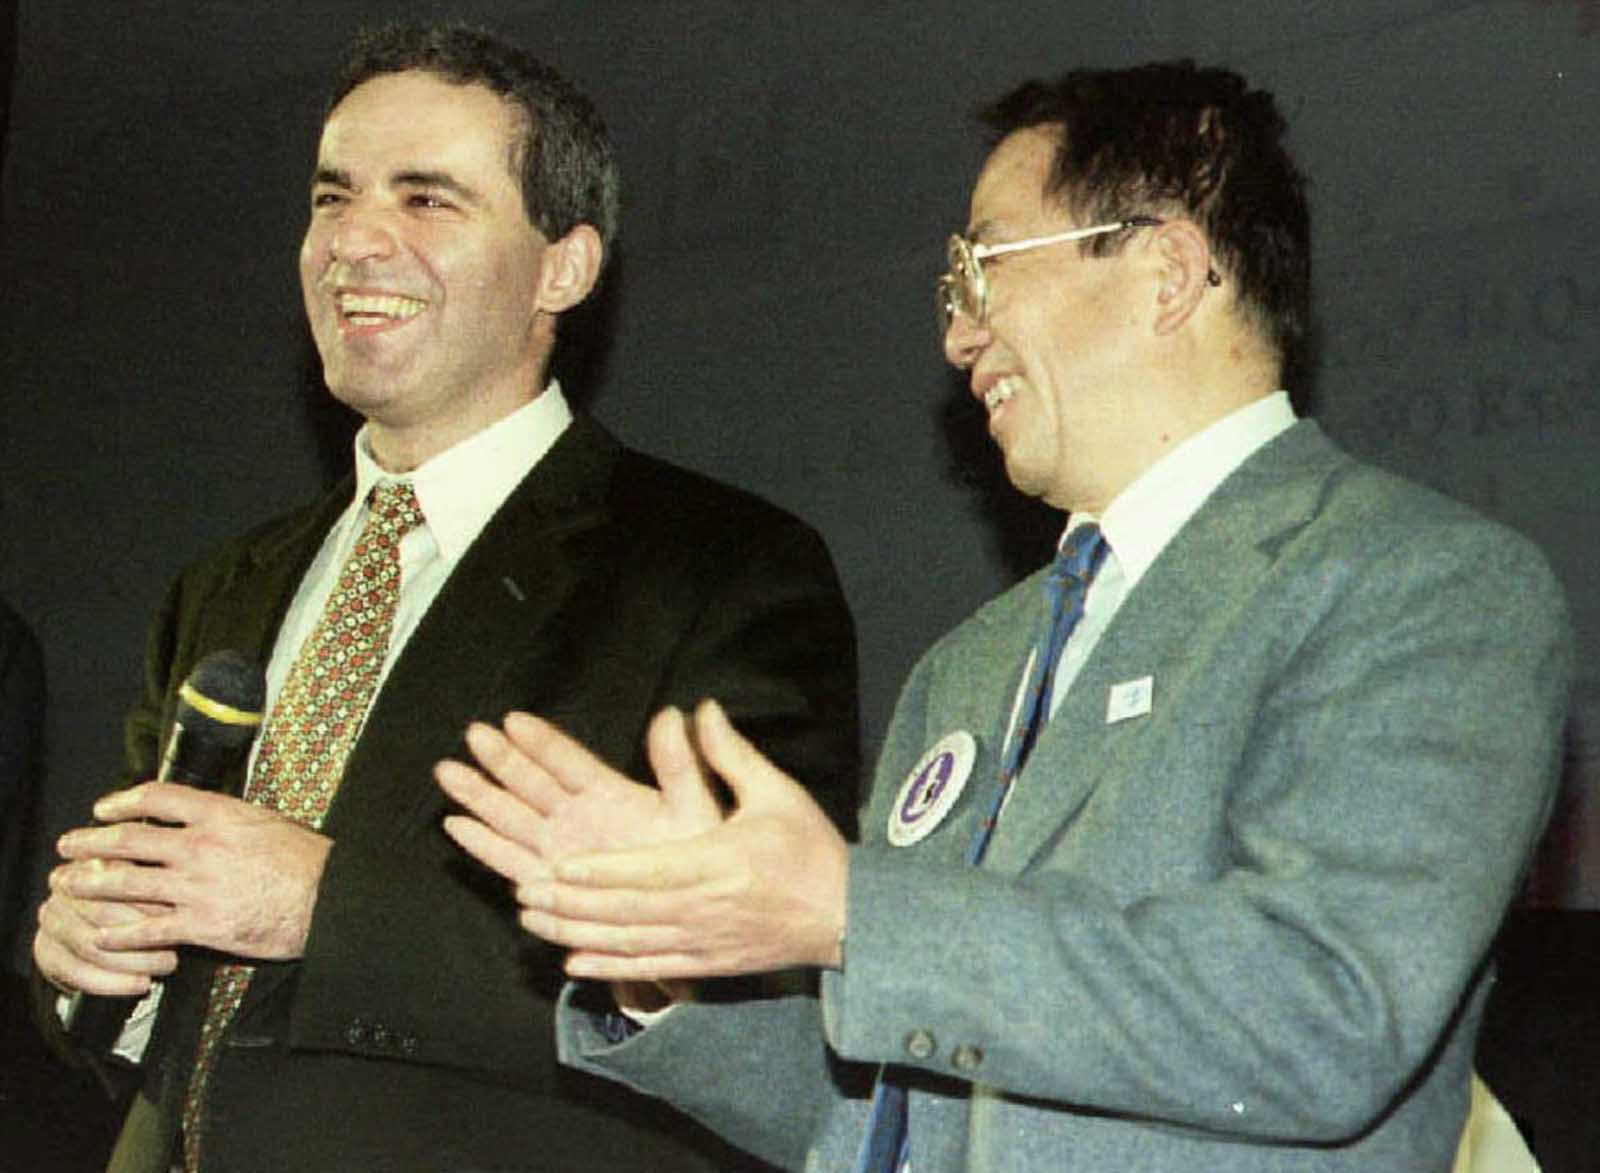 Deep Blue developer Dr. Chung-Jen Tan applauds Garry Kasparov after his victory over the supercomputer in the six-game match.